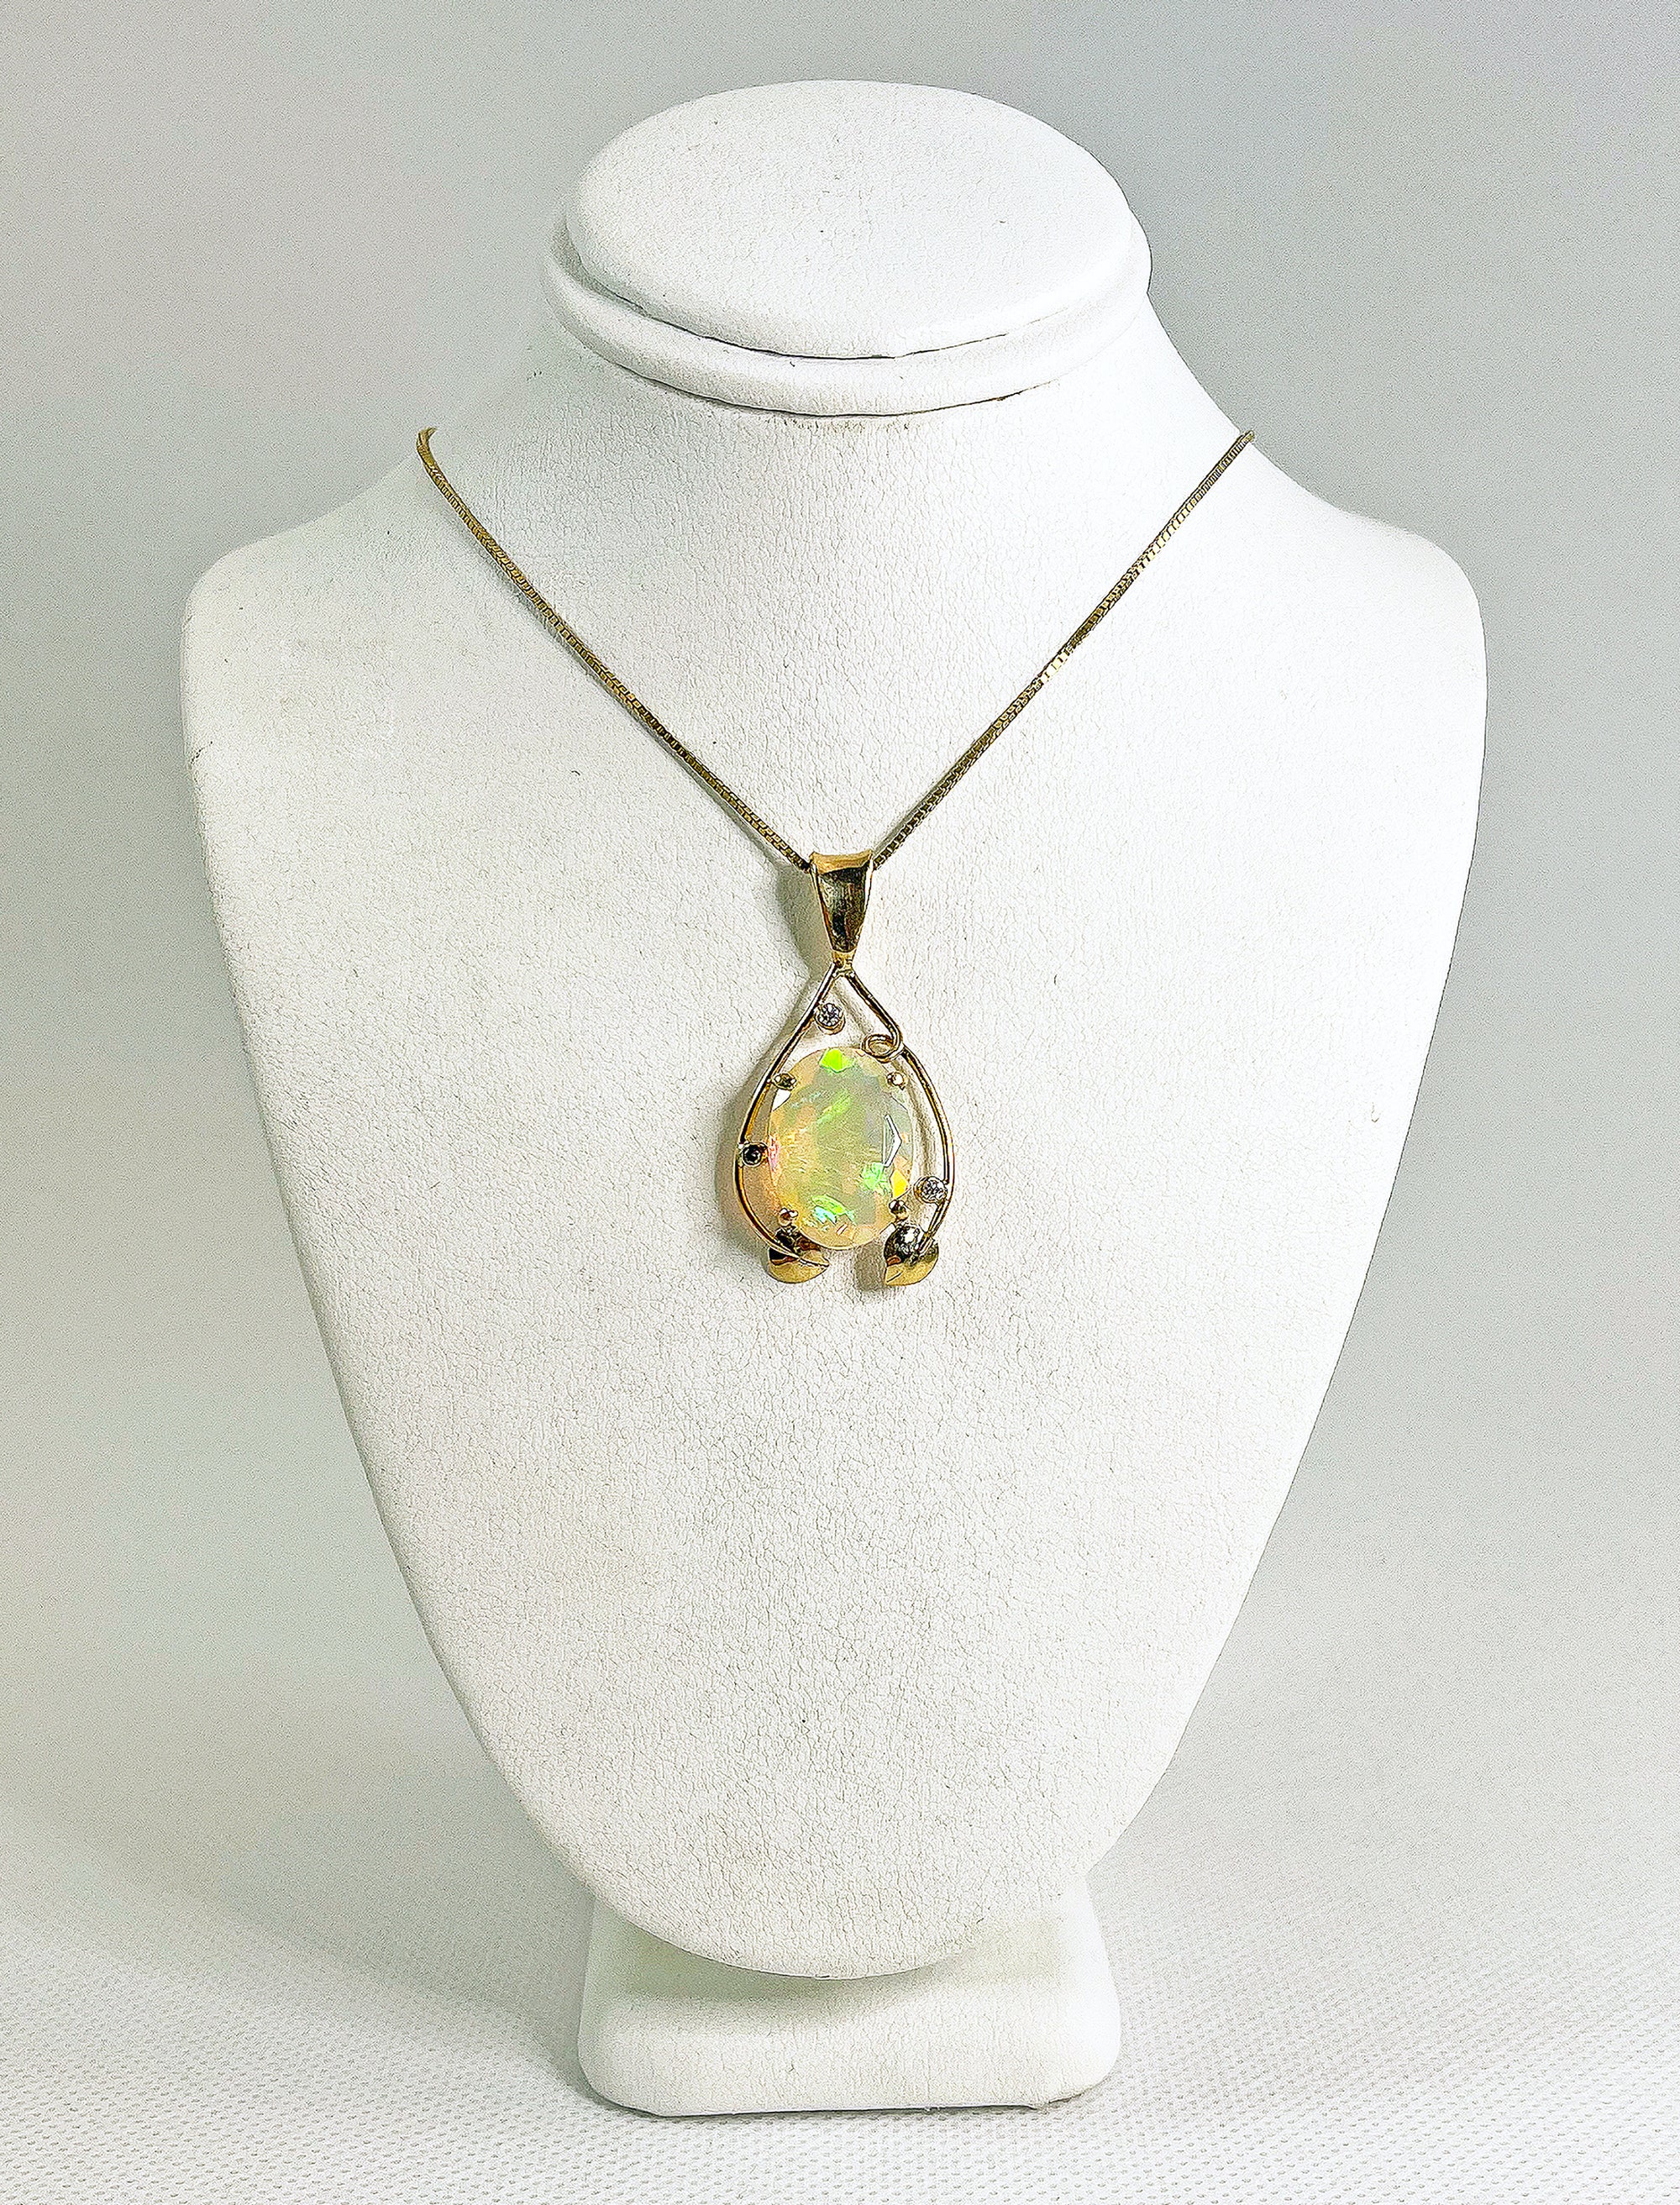 Cole Sheckler Necklace - Ethiopian Opal w/ Diamonds in 14kt Yellow Gold Scrolls and Leaves